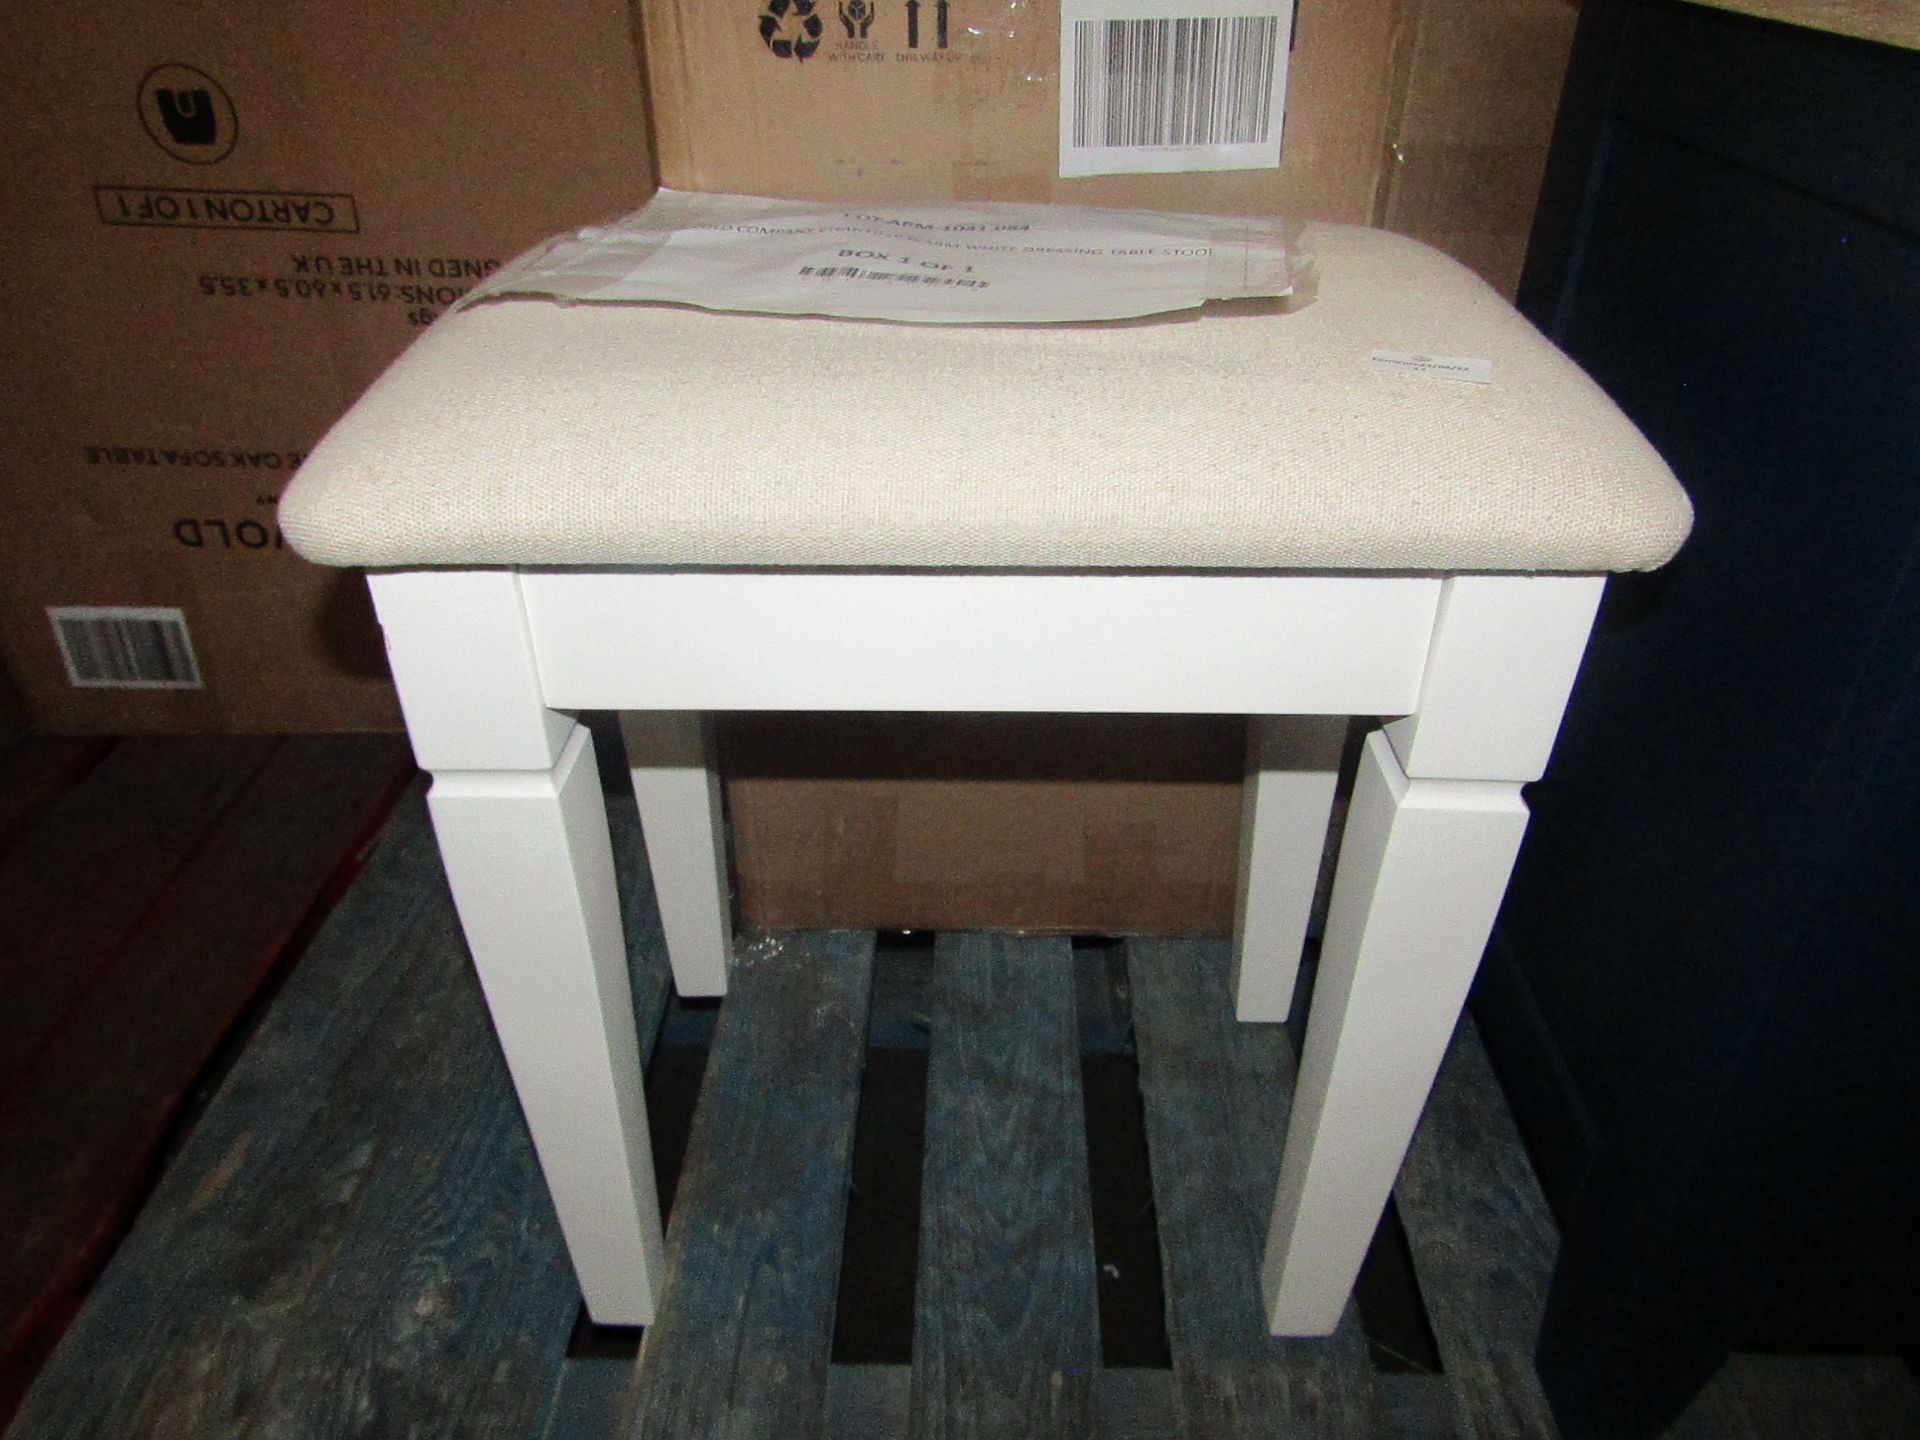 Cotswold Company Chantilly Warm White Dressing Table Stool RRP Â£125.00 - The items in this lot